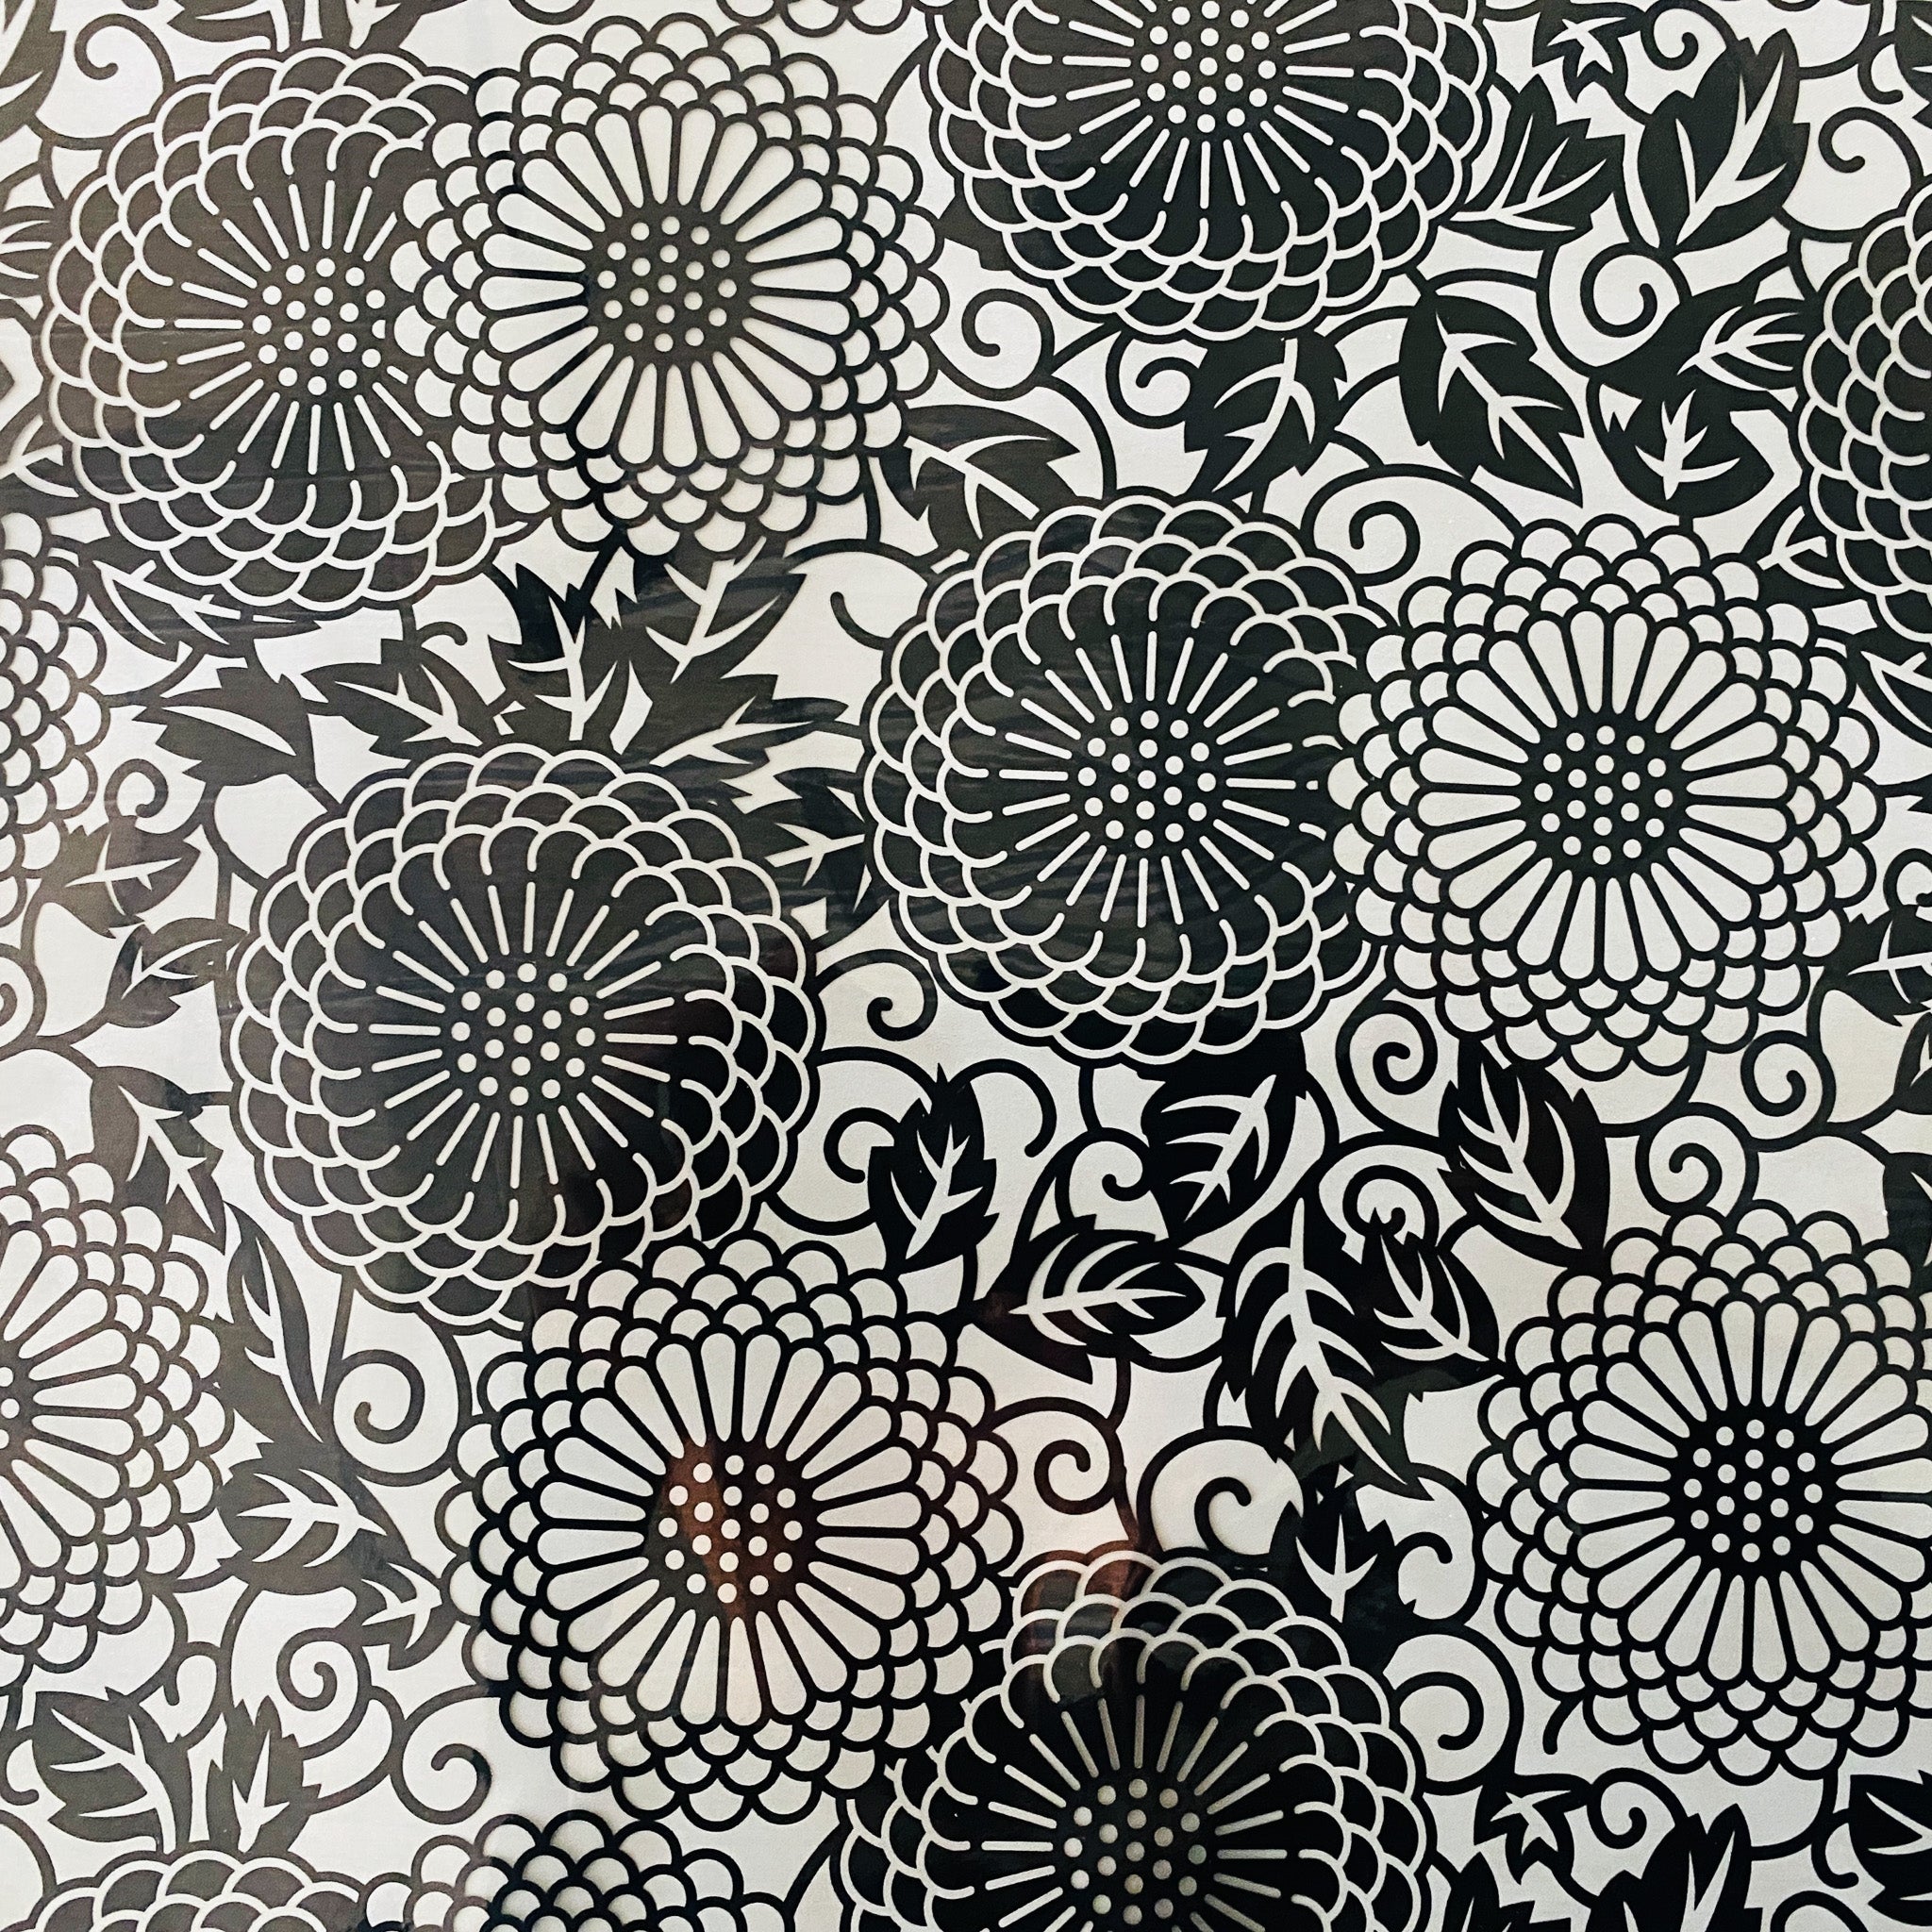 A close-up of a foil transfer that features a black circular floral pattern is against a white background.